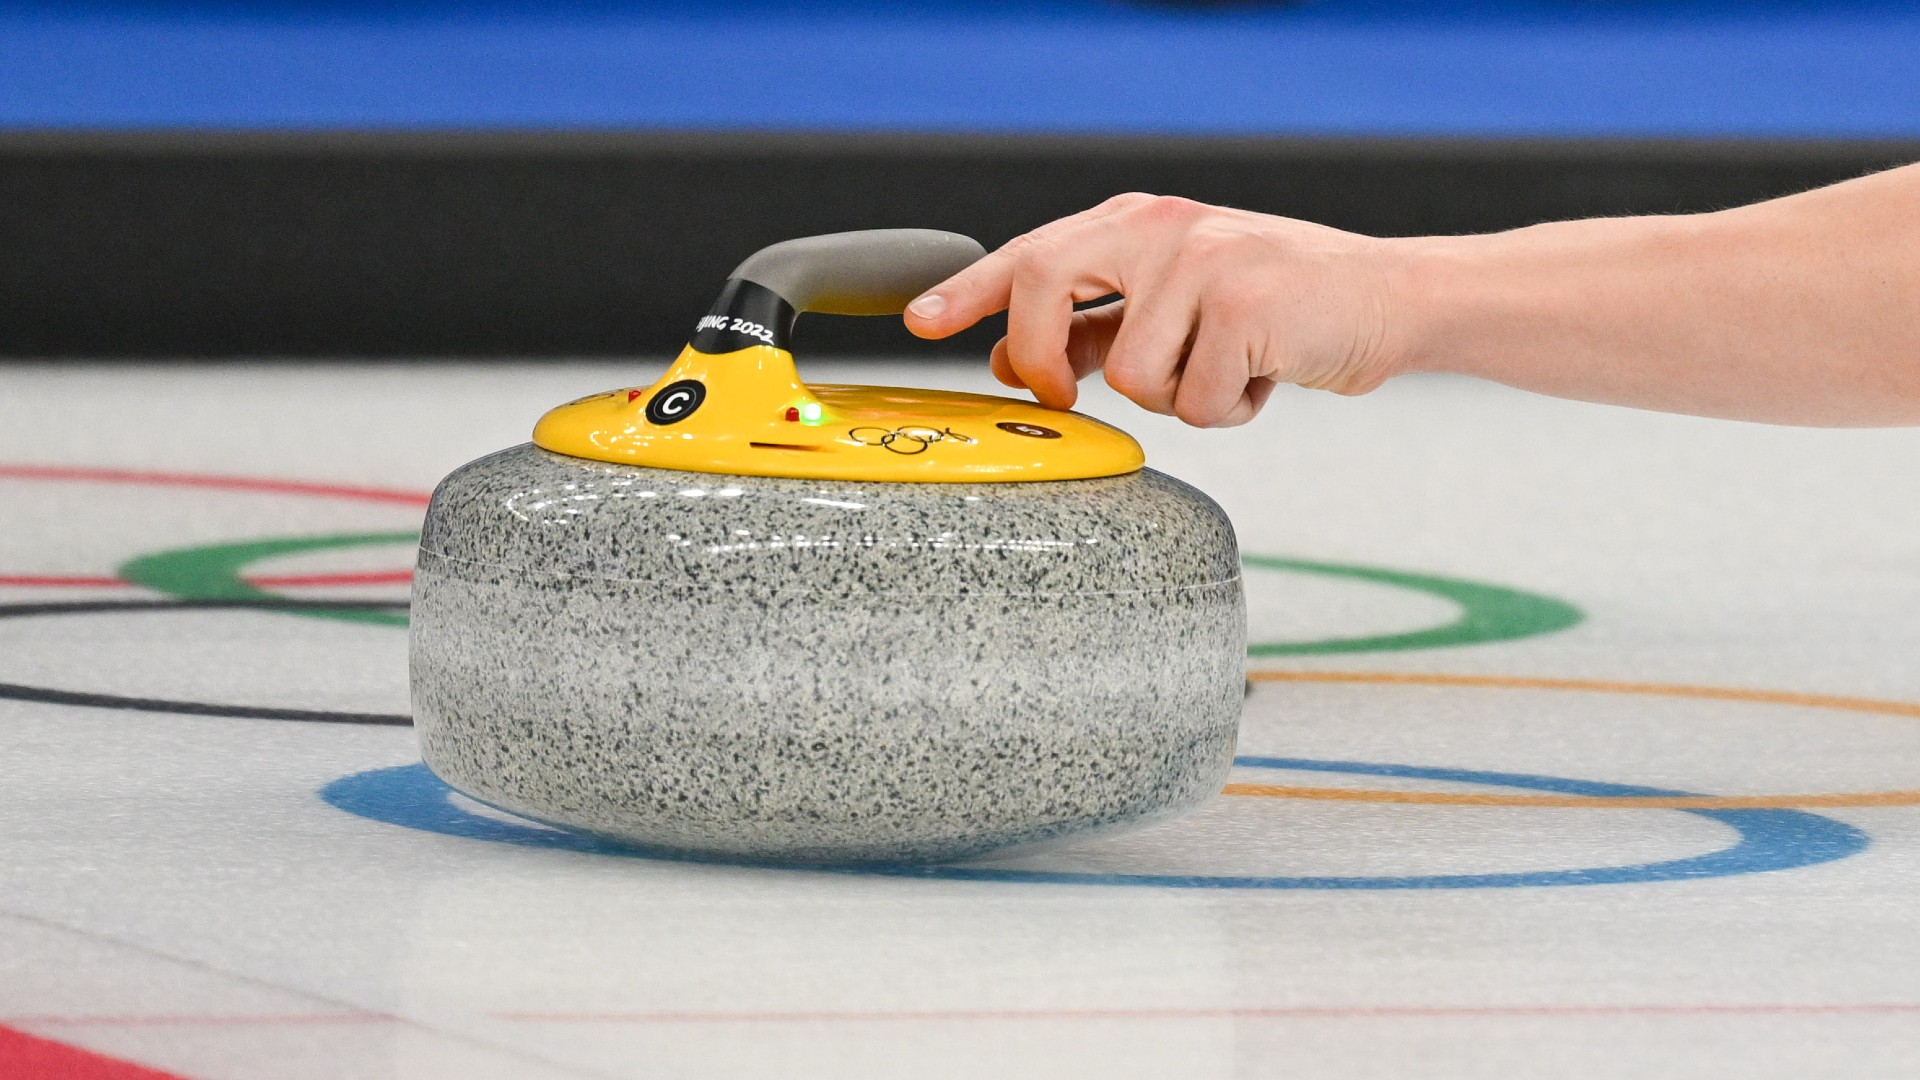 cbc mixed curling live stream